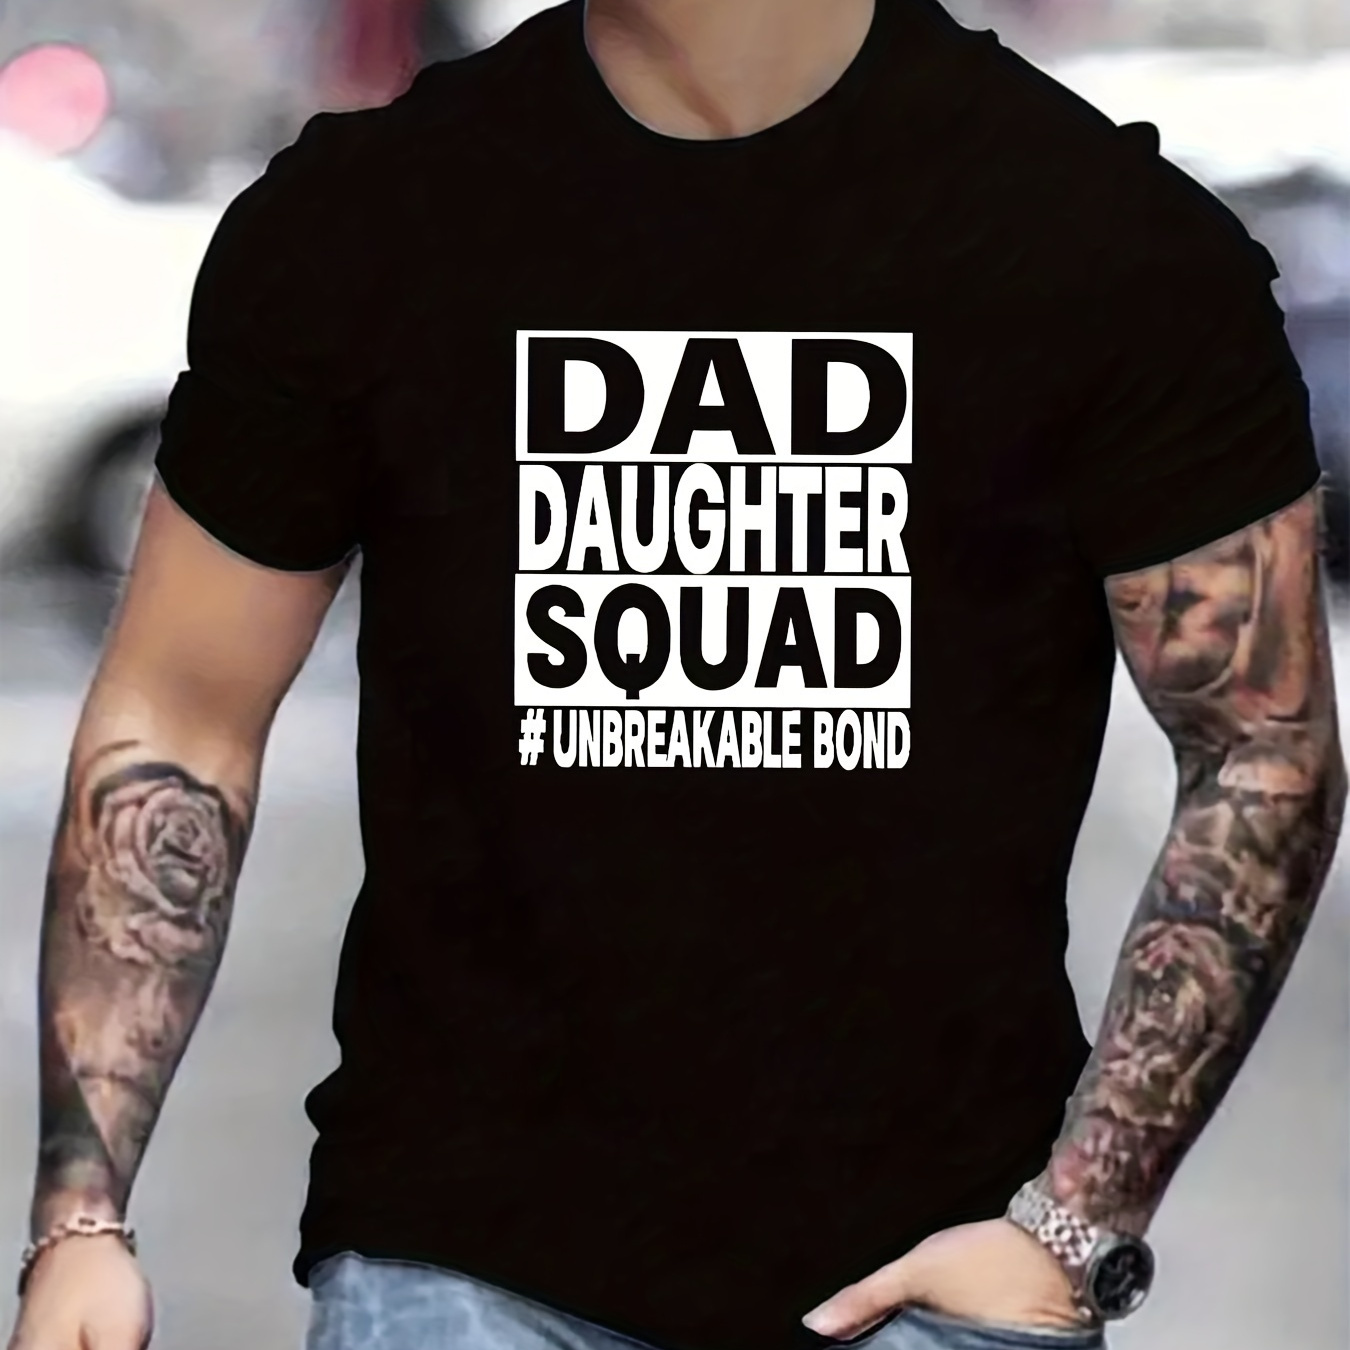 

Dad Daughter Squad Print T Shirt, Tees For Men, Casual Short Sleeve T-shirt For Summer